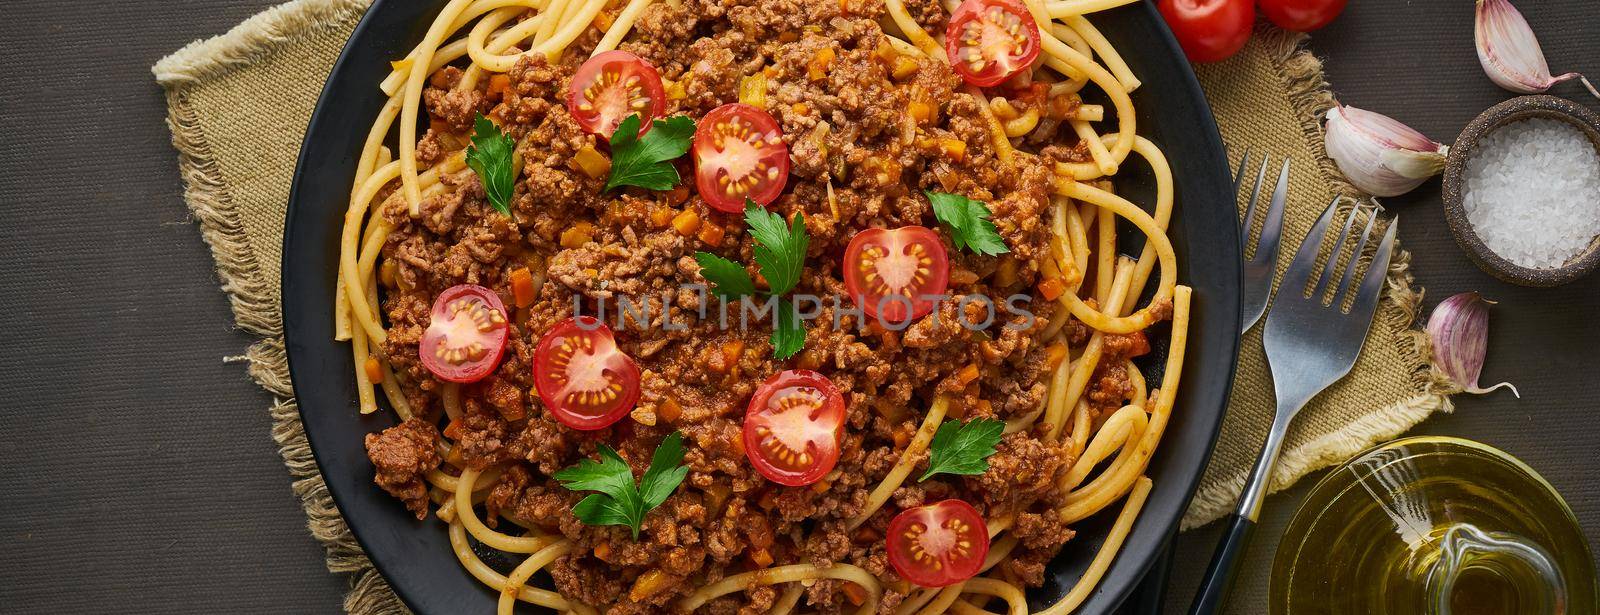 mediterranean pasta bolognese bucatini with mincemeat, tomatoes, carrot and basil leaves